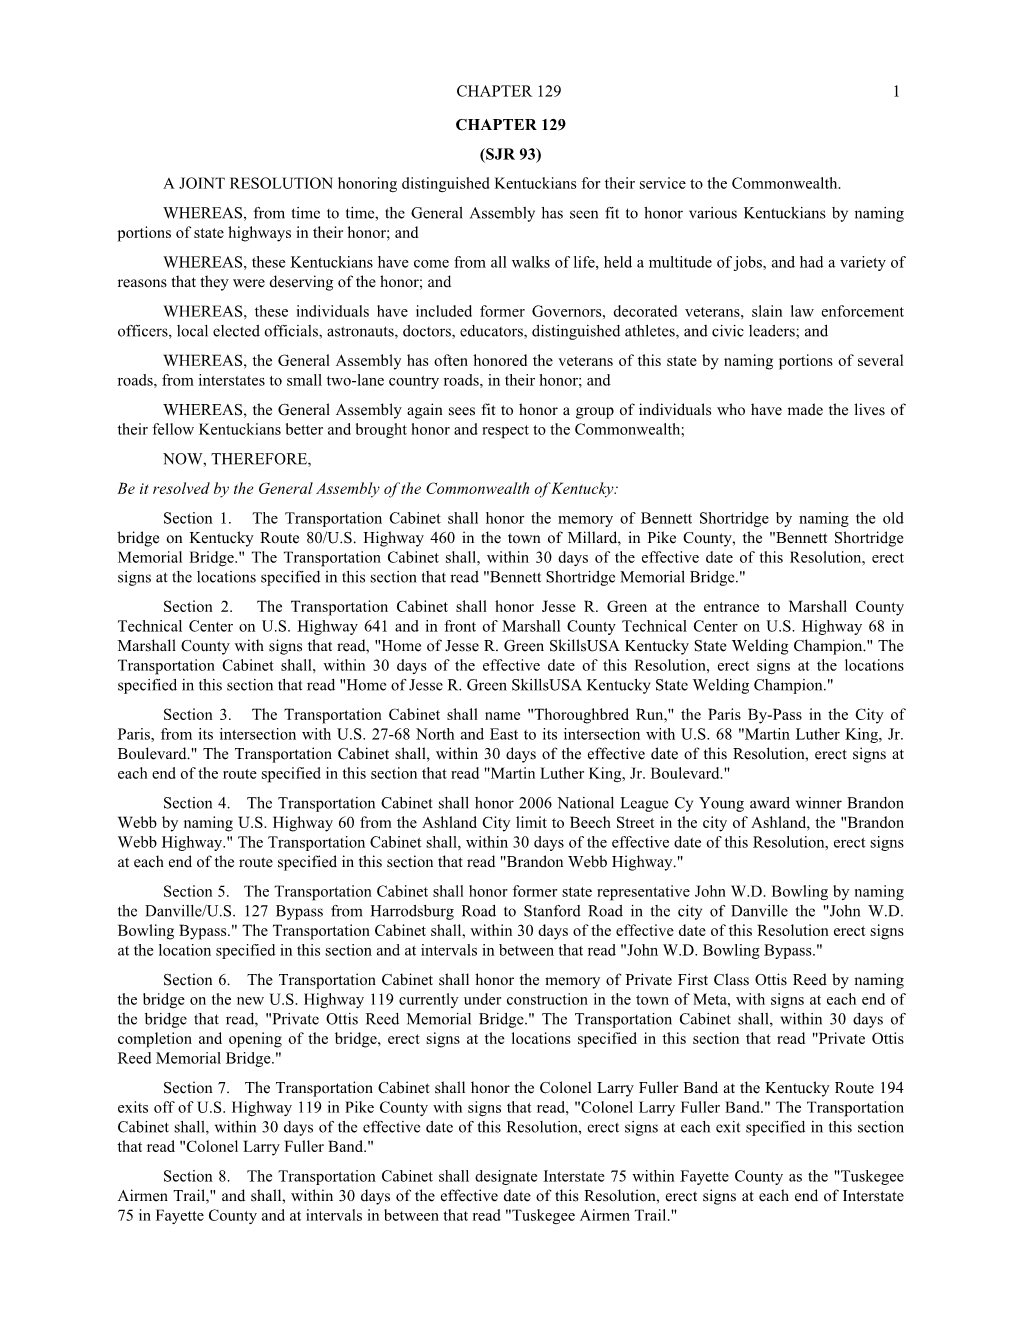 CHAPTER 129 (SJR 93) a JOINT RESOLUTION Honoring Distinguished Kentuckians for Their Service to the Commonwealth